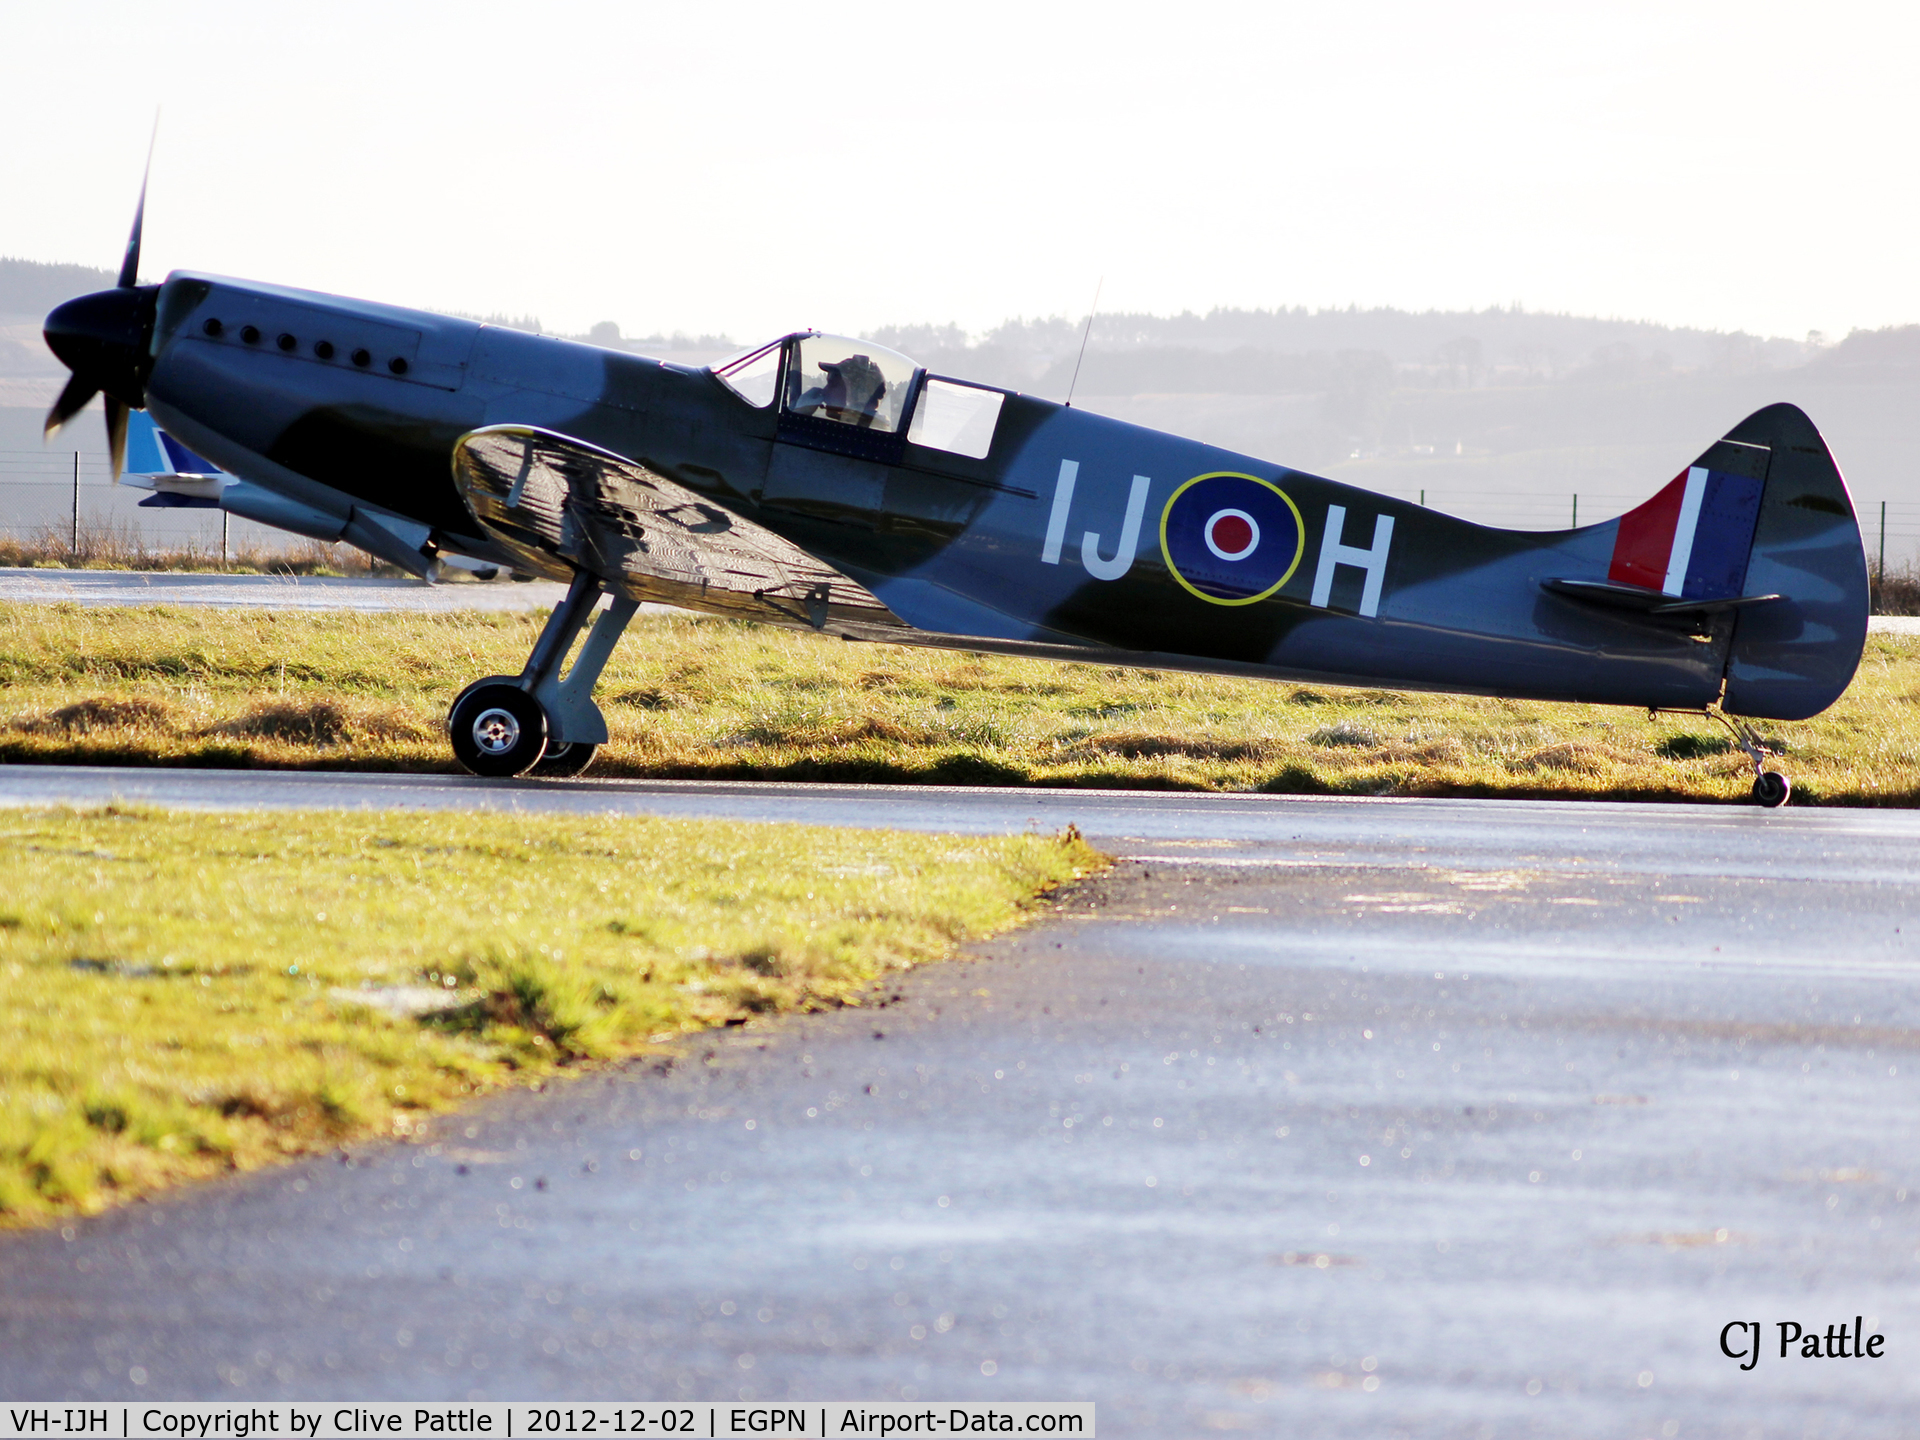 VH-IJH, Supermarine Aircraft Spitfire Mk.26 C/N 036, Taxy in at Dundee Riverside EGPN from its base at nearby Perth EGPT